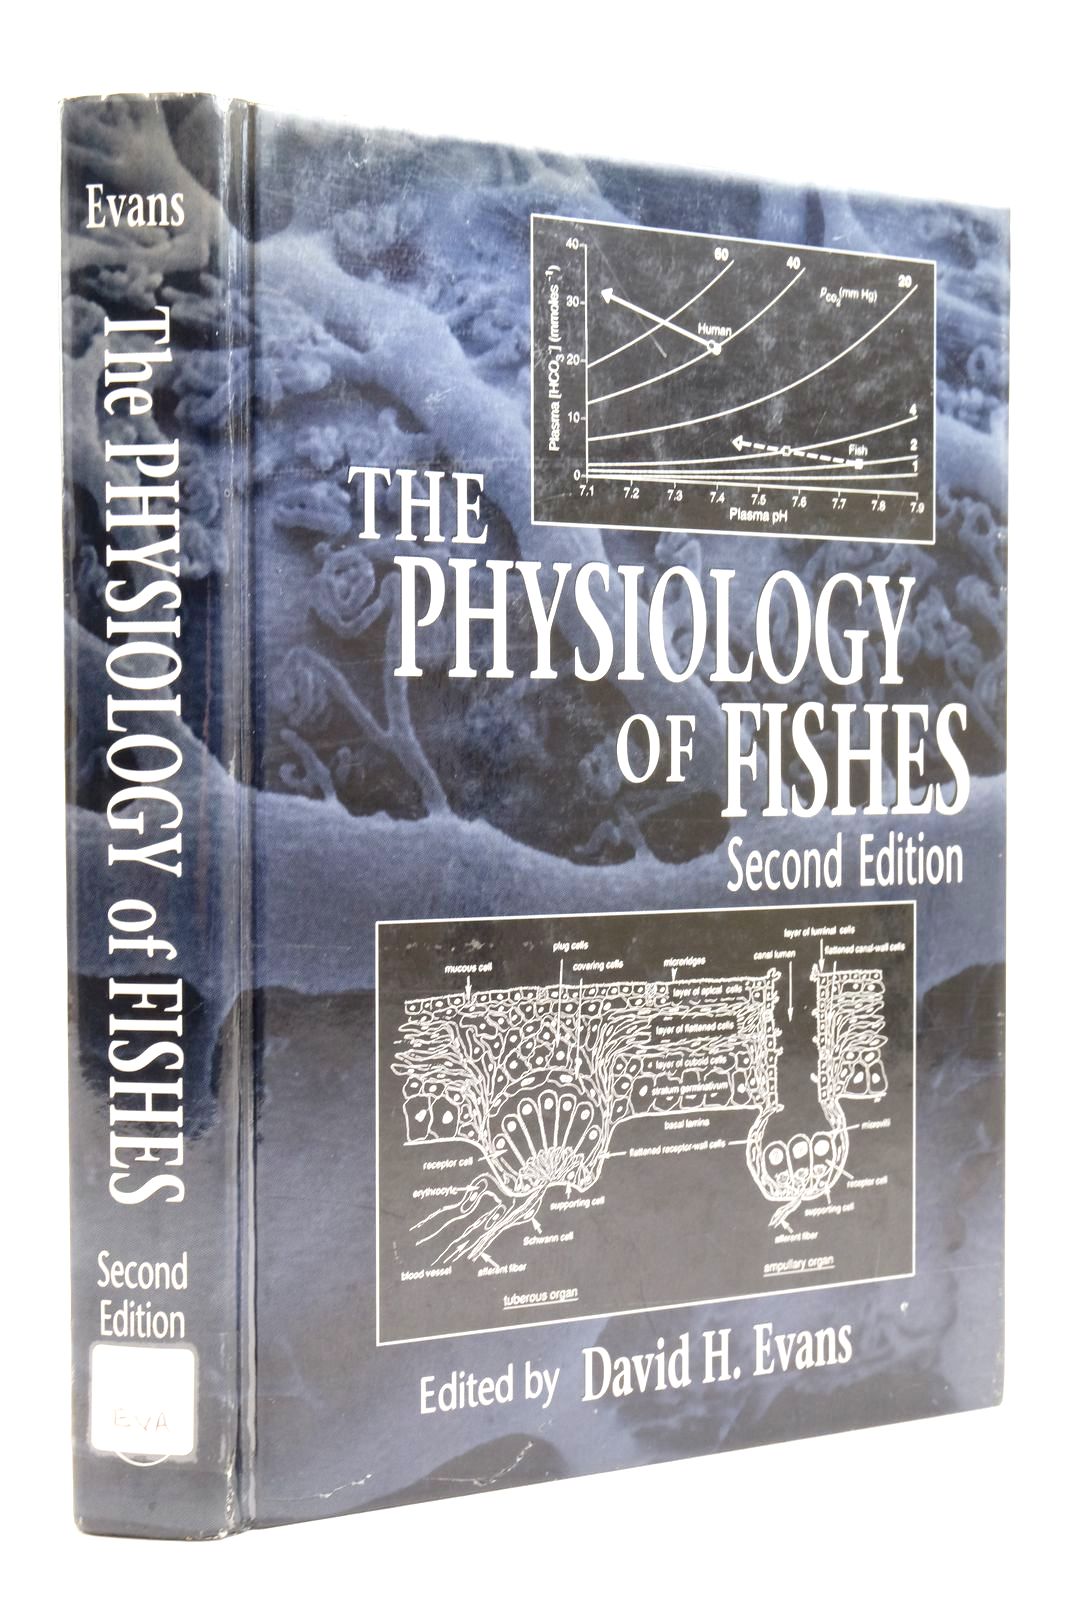 Photo of THE PHYSIOLOGY OF FISHES written by Evans, David H. published by CRC Press (STOCK CODE: 2137713)  for sale by Stella & Rose's Books